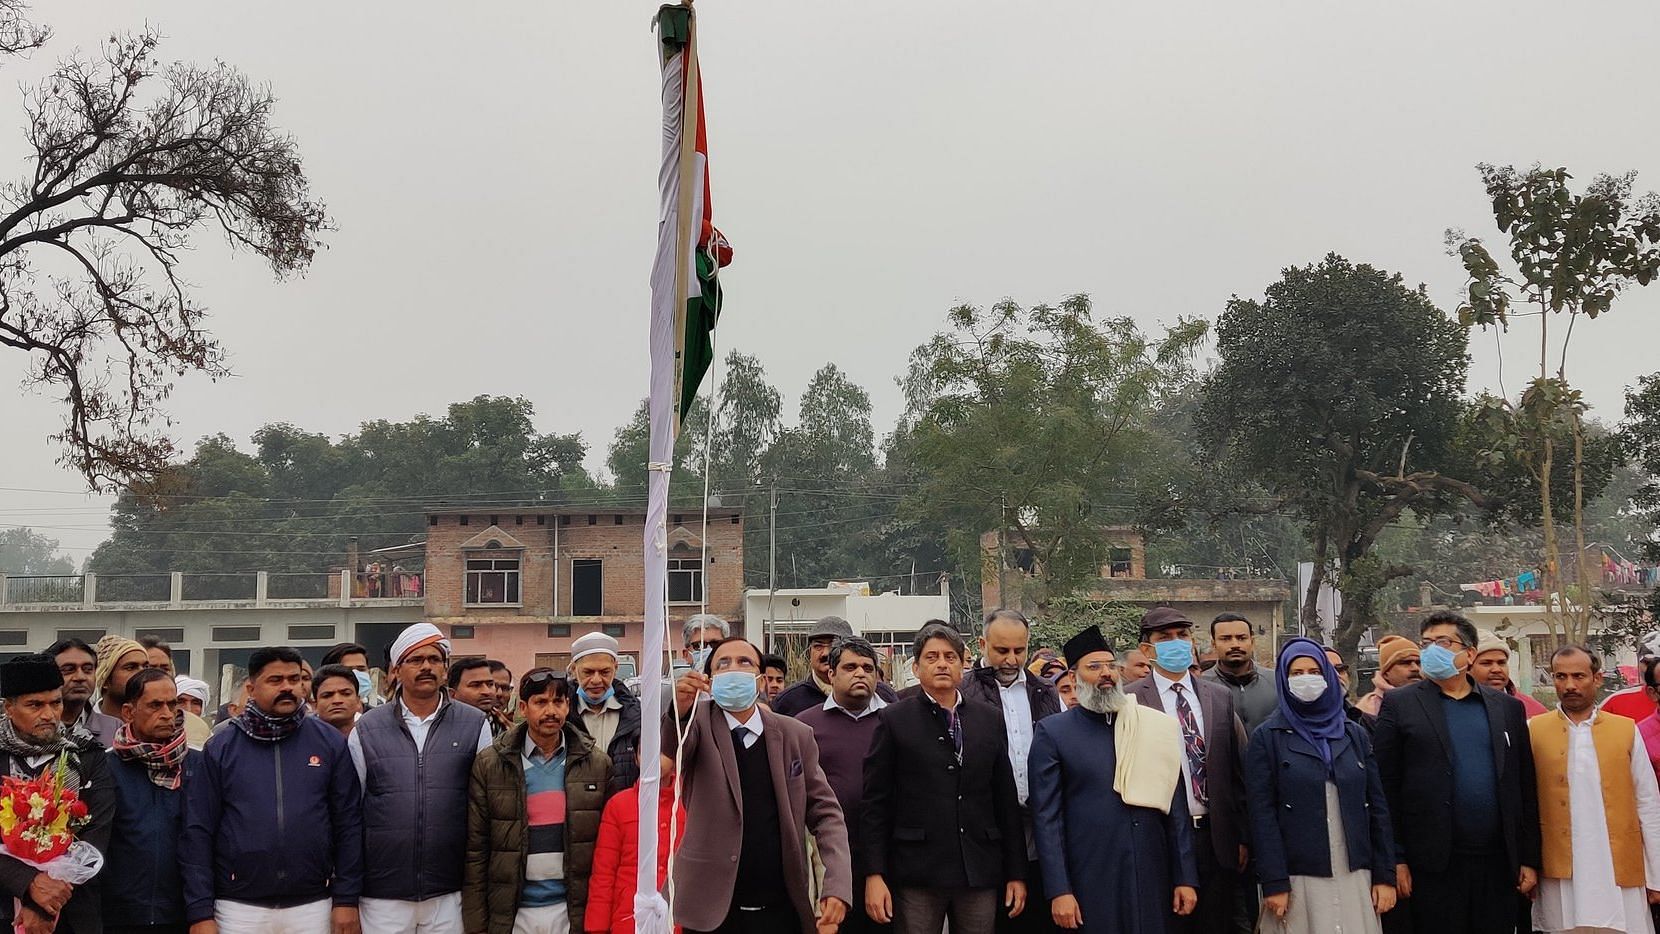 The national flag was hoisted at 8.45am by theChief Trustee of IICF, Mr Zufar Ahmad Farooqi.